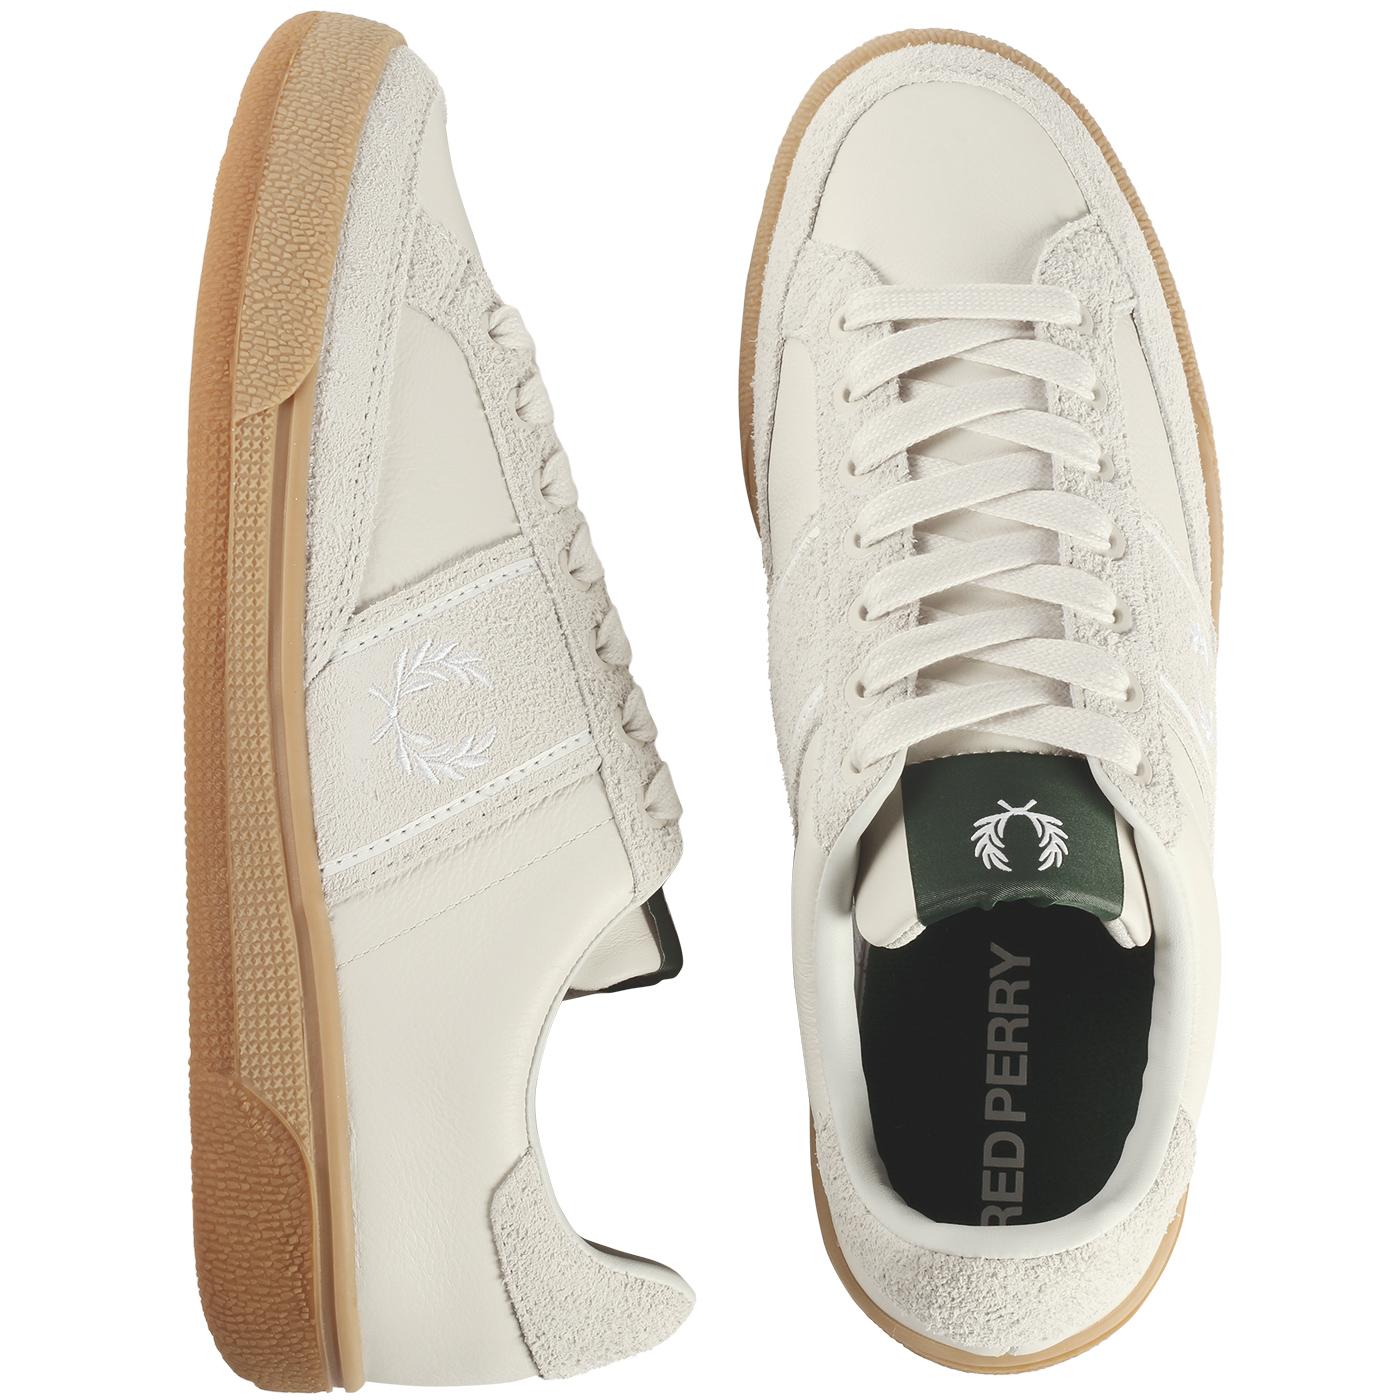 FRED PERRY B3 Retro Leather/Suede Tennis Trainers Porcelain